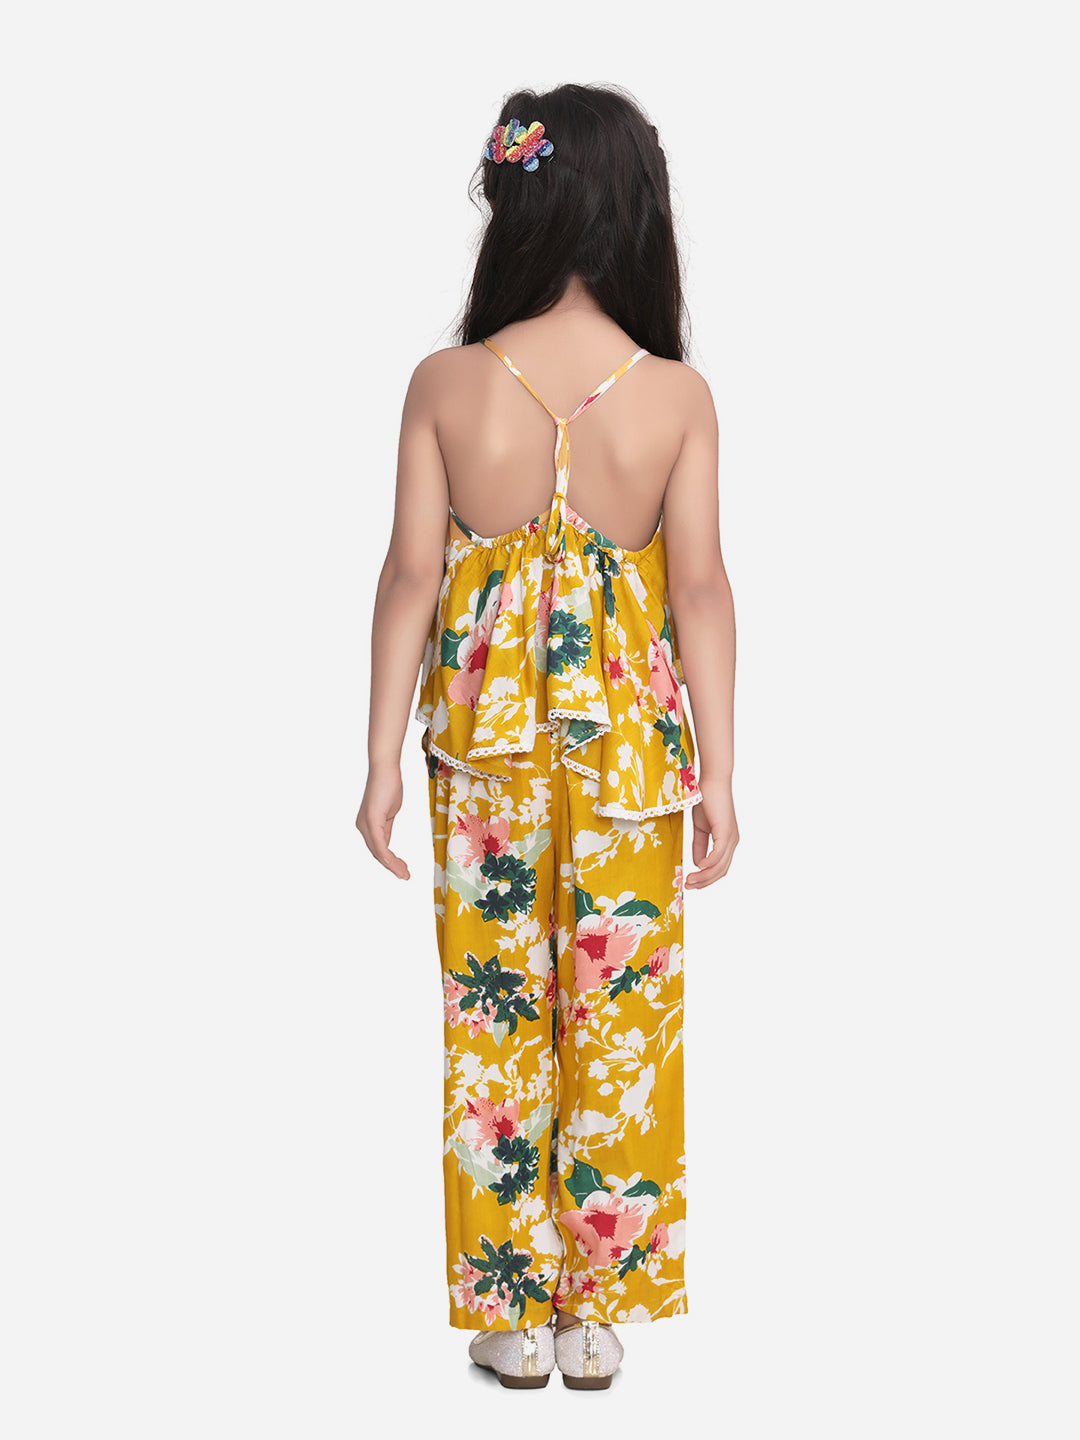 Girls Yellow Floral Cross Back Jumpsuit